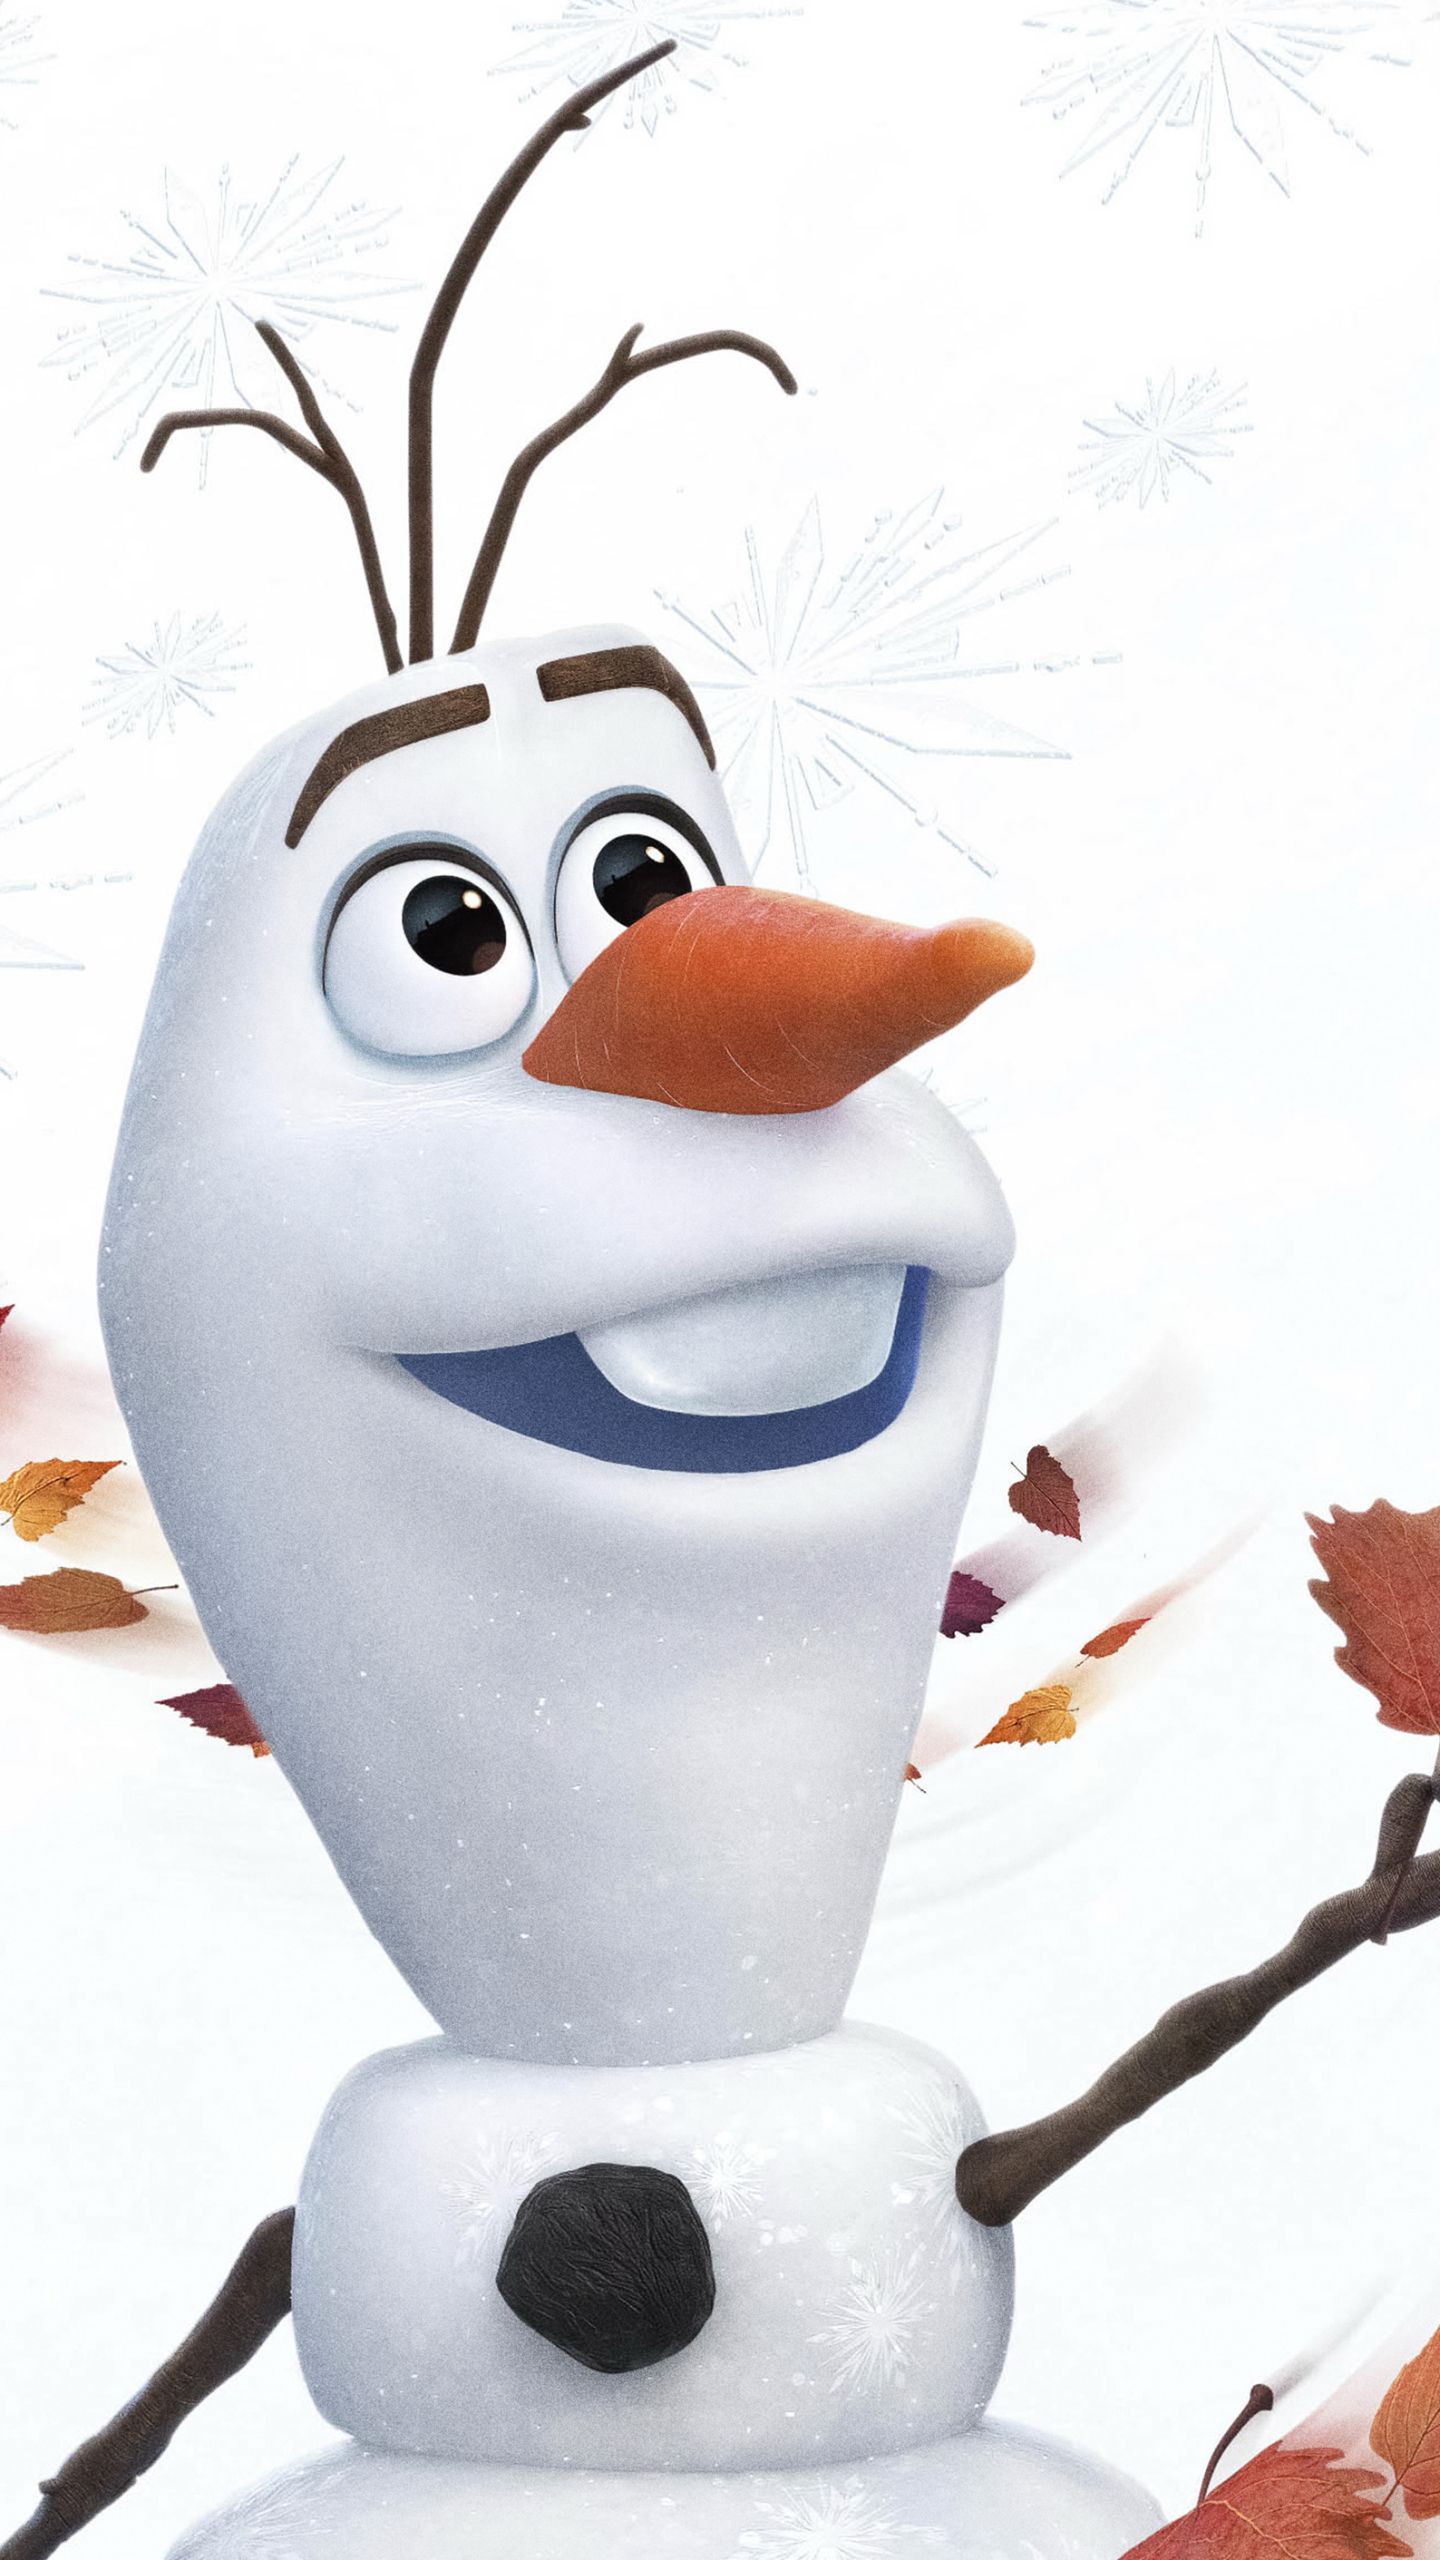 Mobile wallpaper: Movie, Olaf (Frozen), Frozen 1357290 download the picture for free